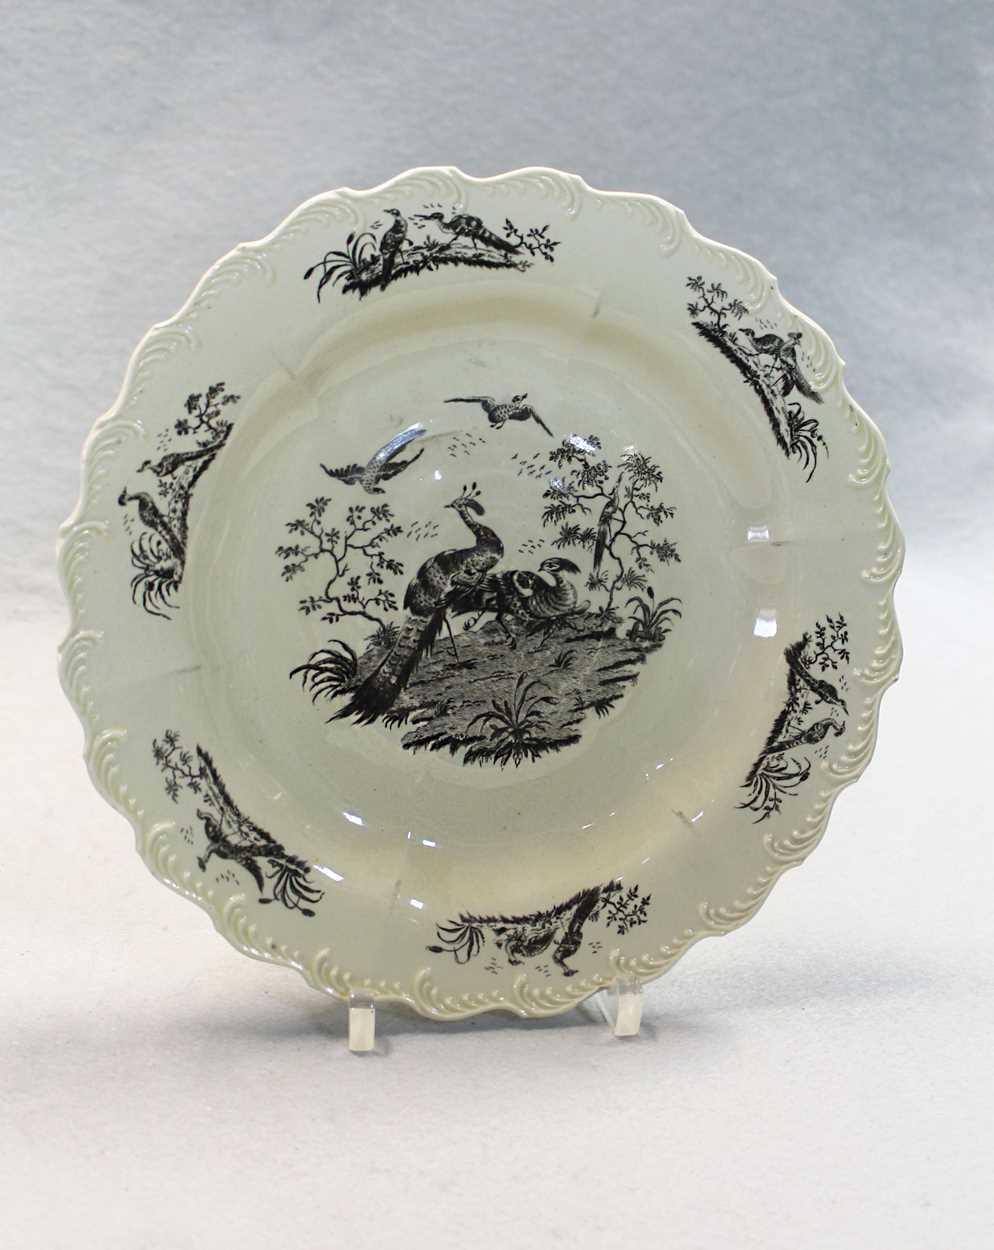 A collection of 18th century creamware plates, - Image 11 of 11